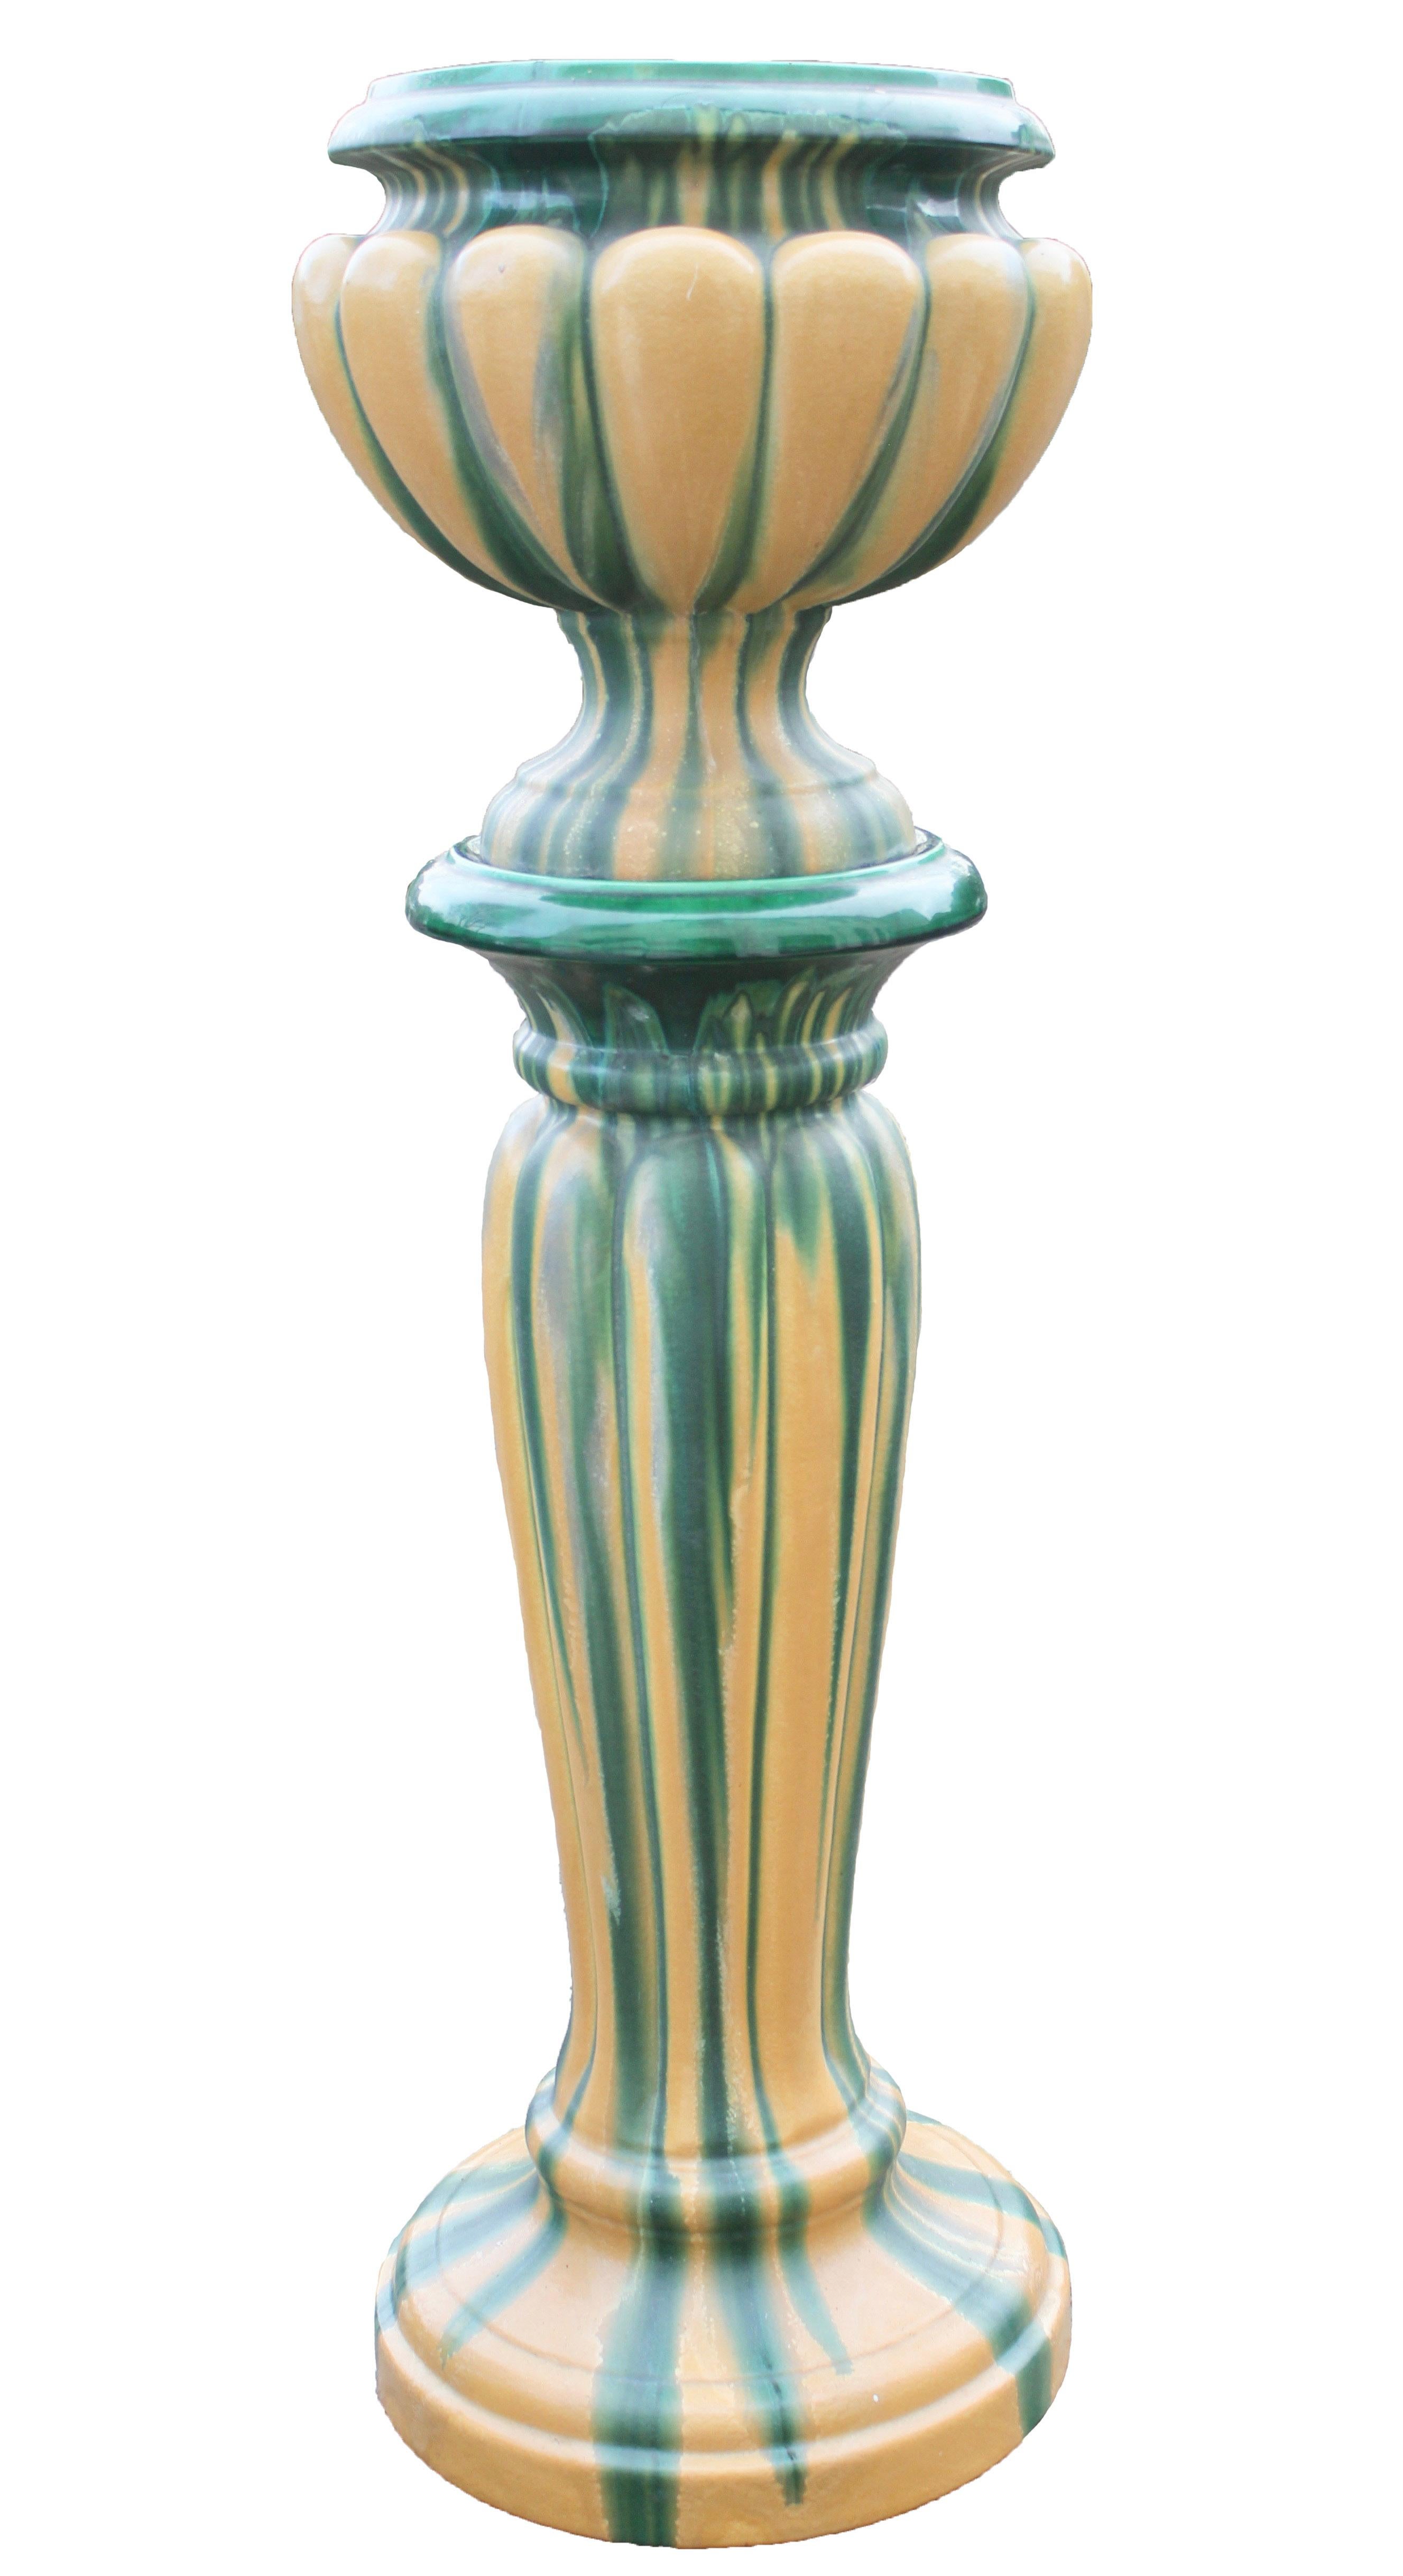 Art Nouveau large ceramic jardinière on stand, Belgium, 1930s.

The piece is in excellent condition and a real beauty!
A real treasure for the ceramics' collector.





    

    
    






















 